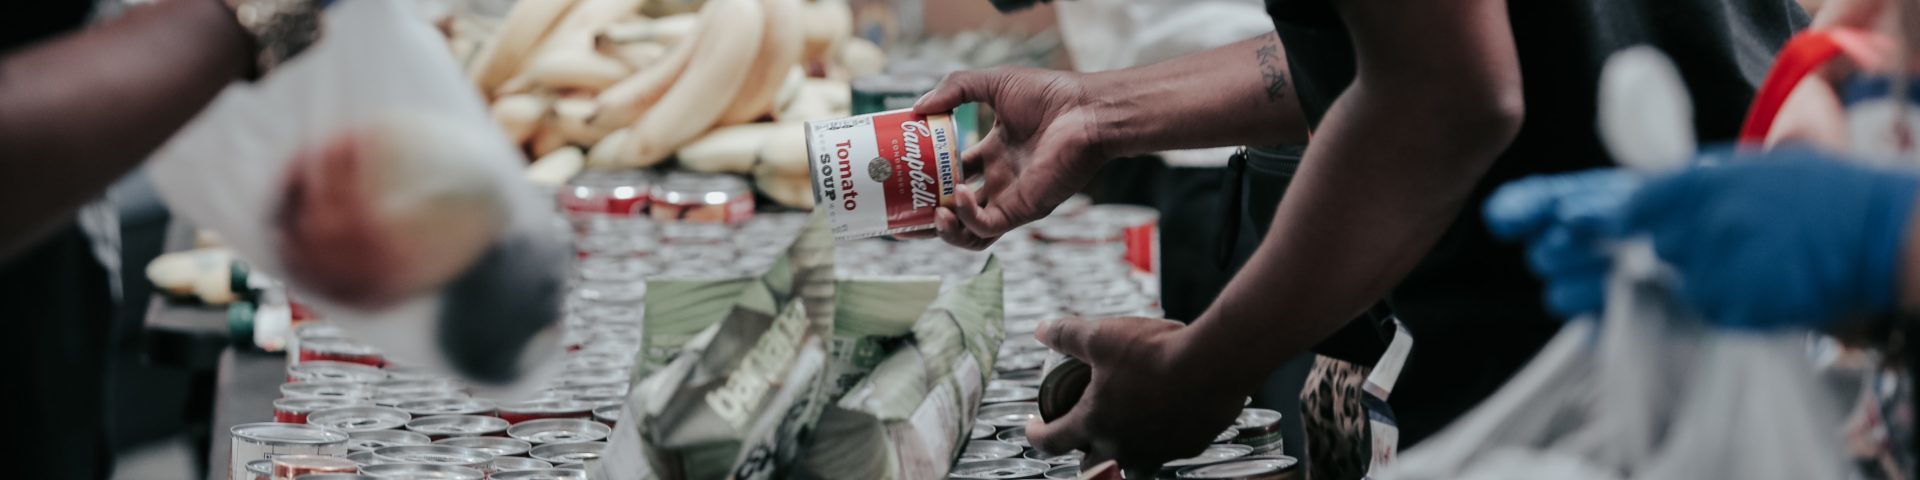 Close up photo of a table at a food bank with people passing food.